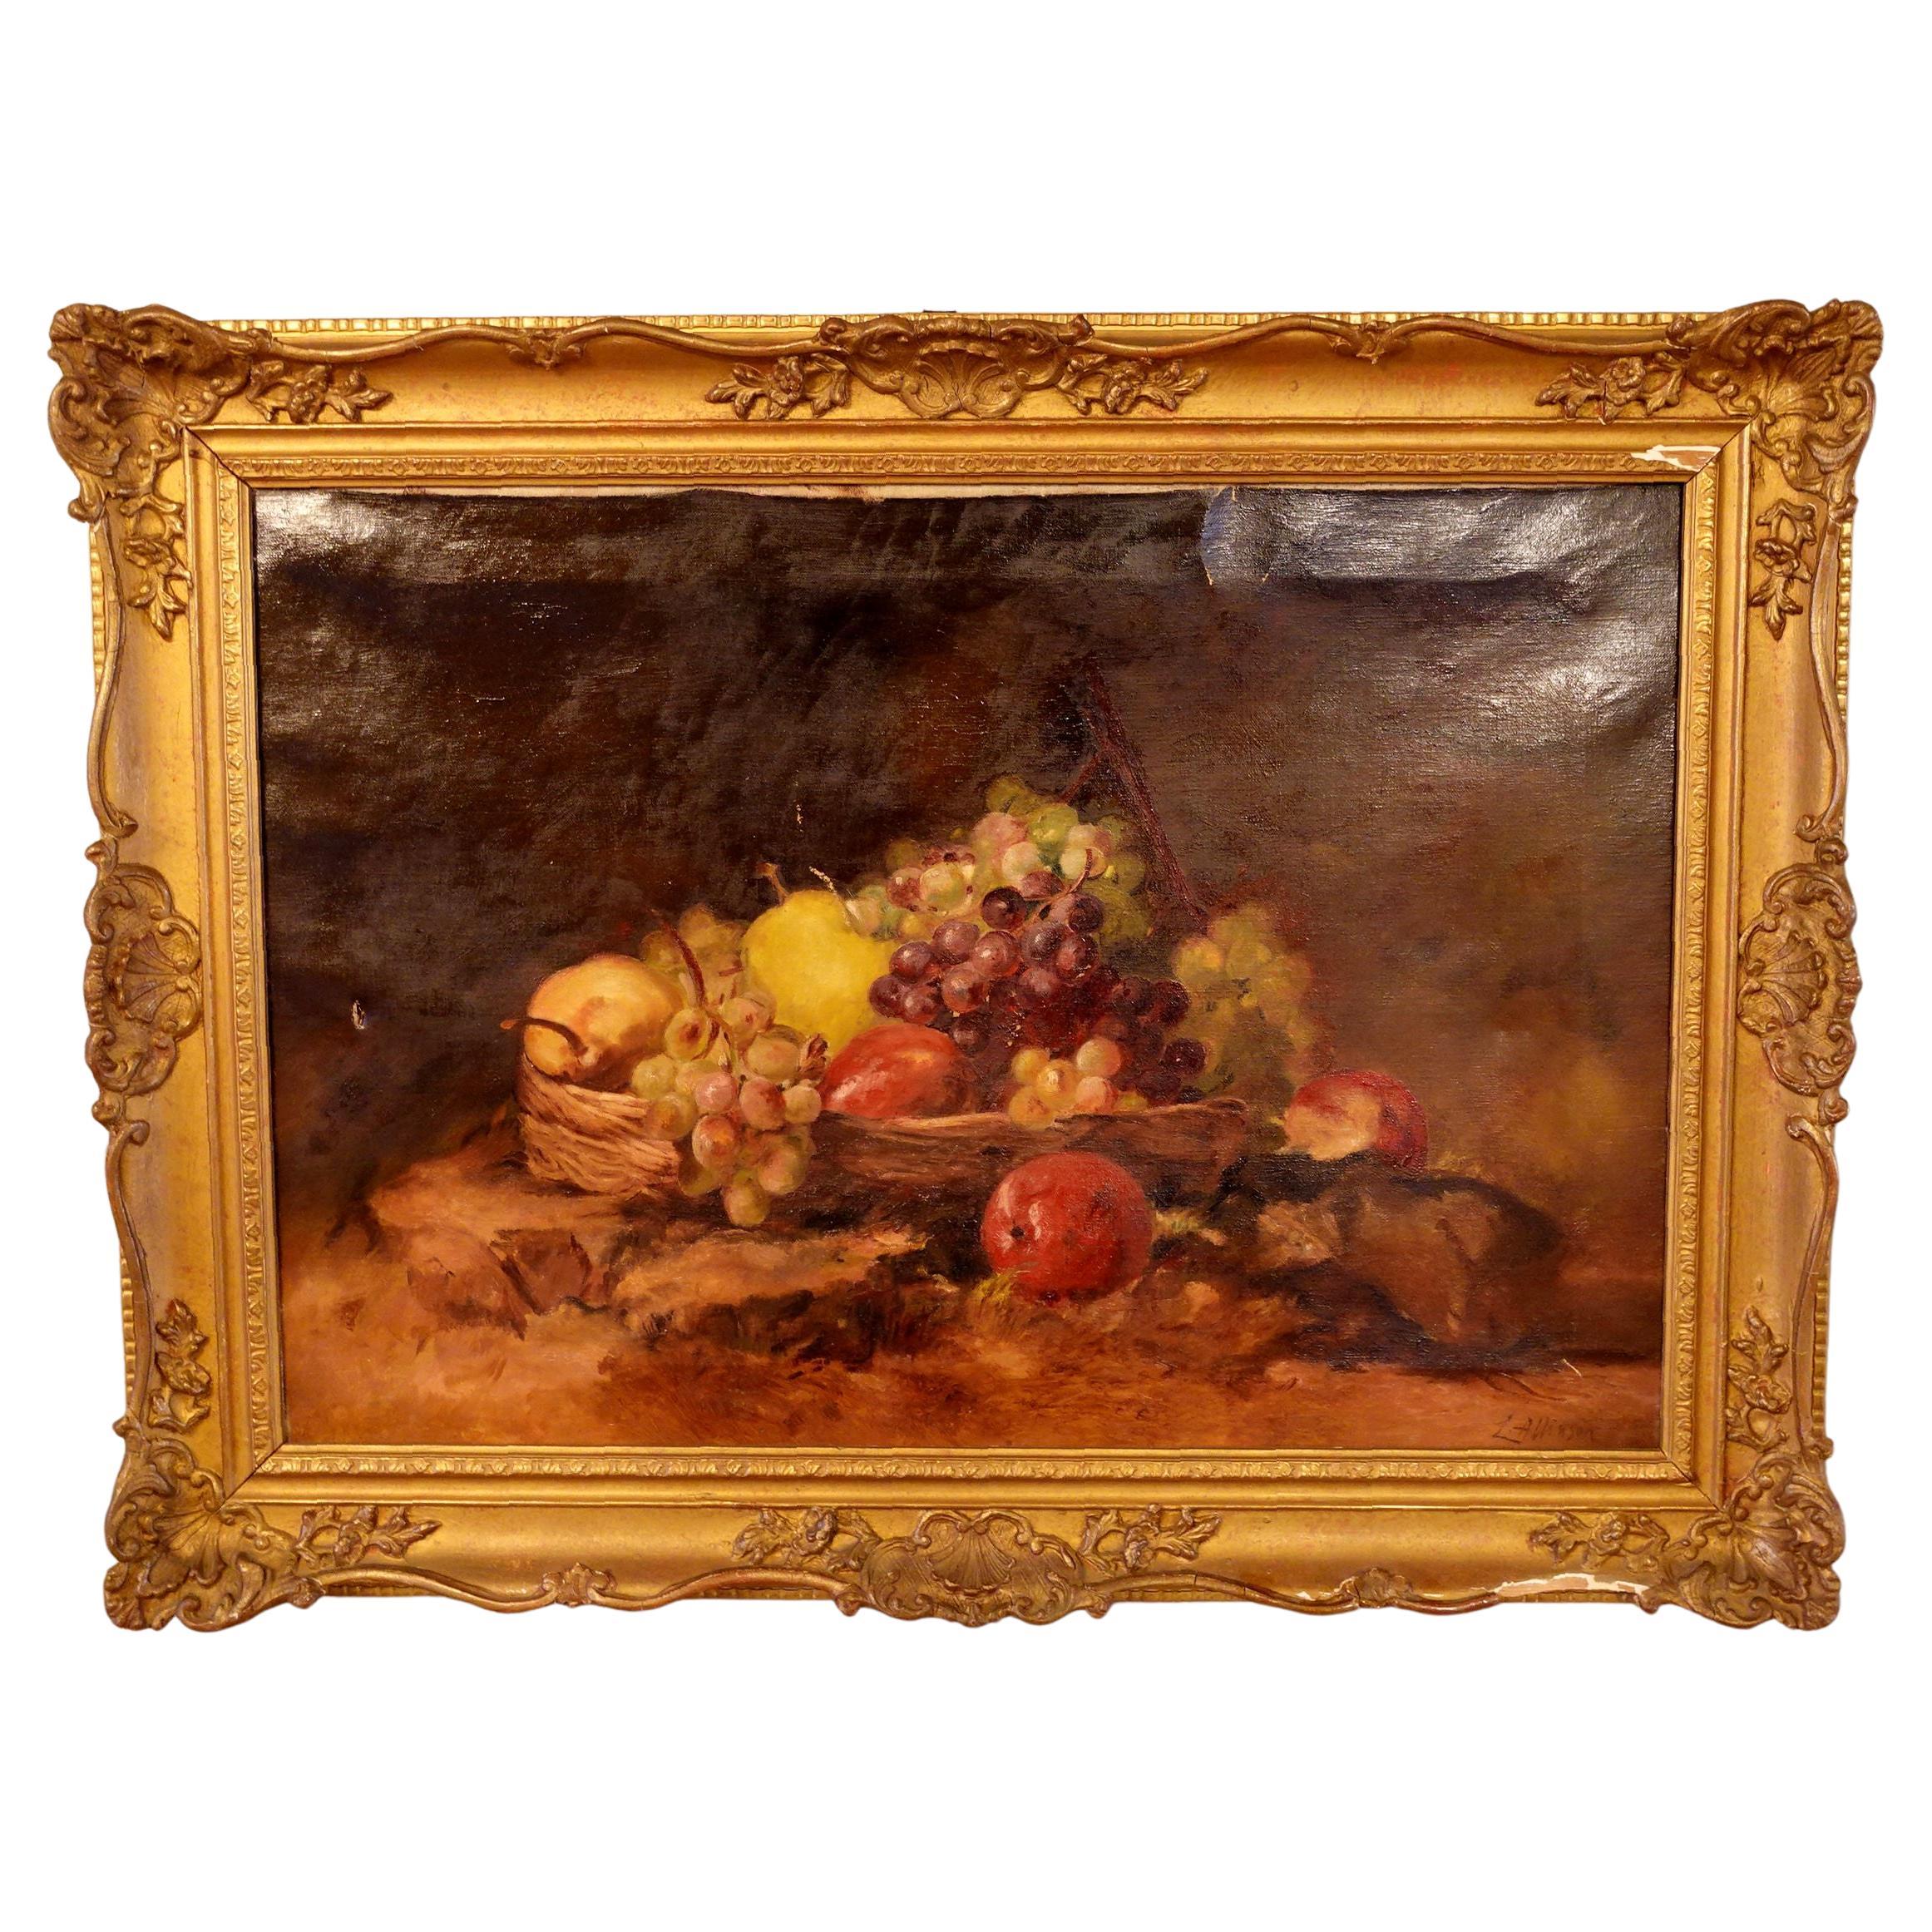 Oil Painting, "Still Life", by L. Allinson, 19th Century